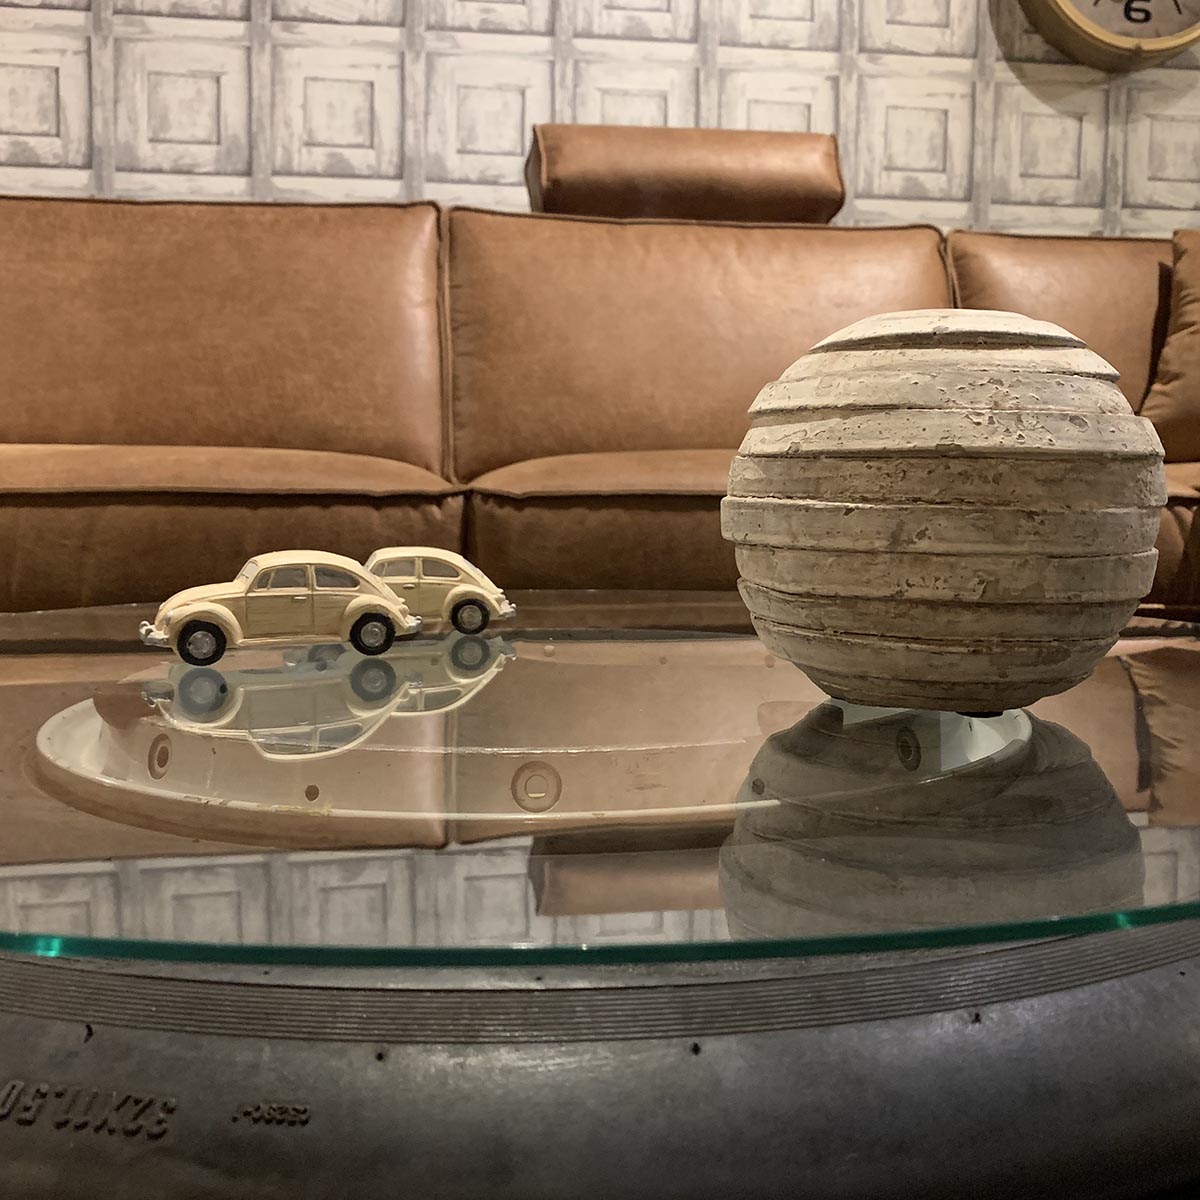 Boeing 727 nosewheel modified to be used as a coffee table in a living room.